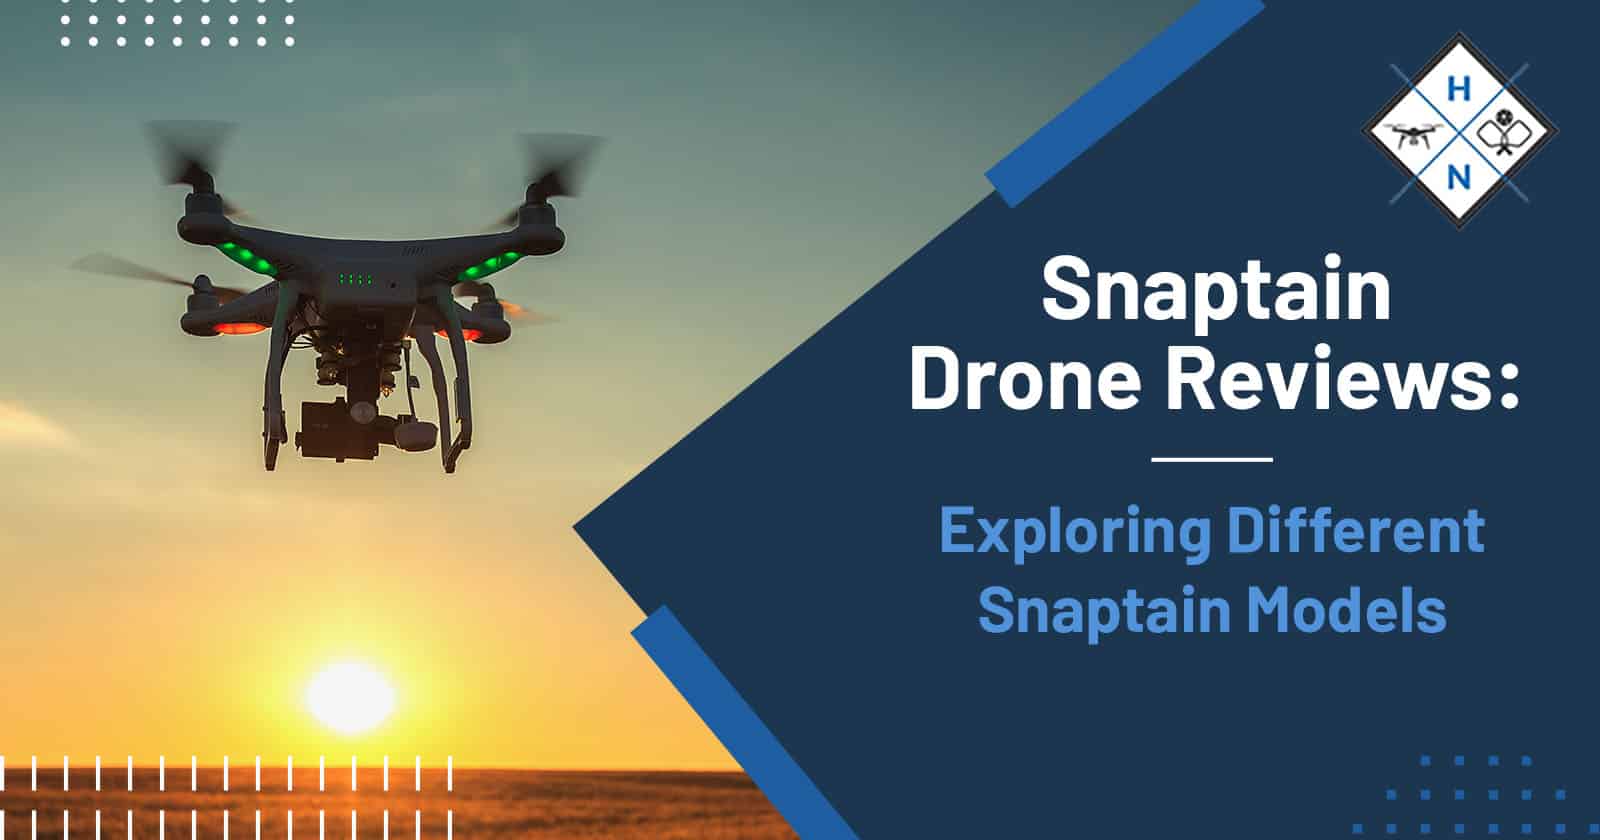 Snaptain Drone Reviews: Exploring Different Snaptain Models